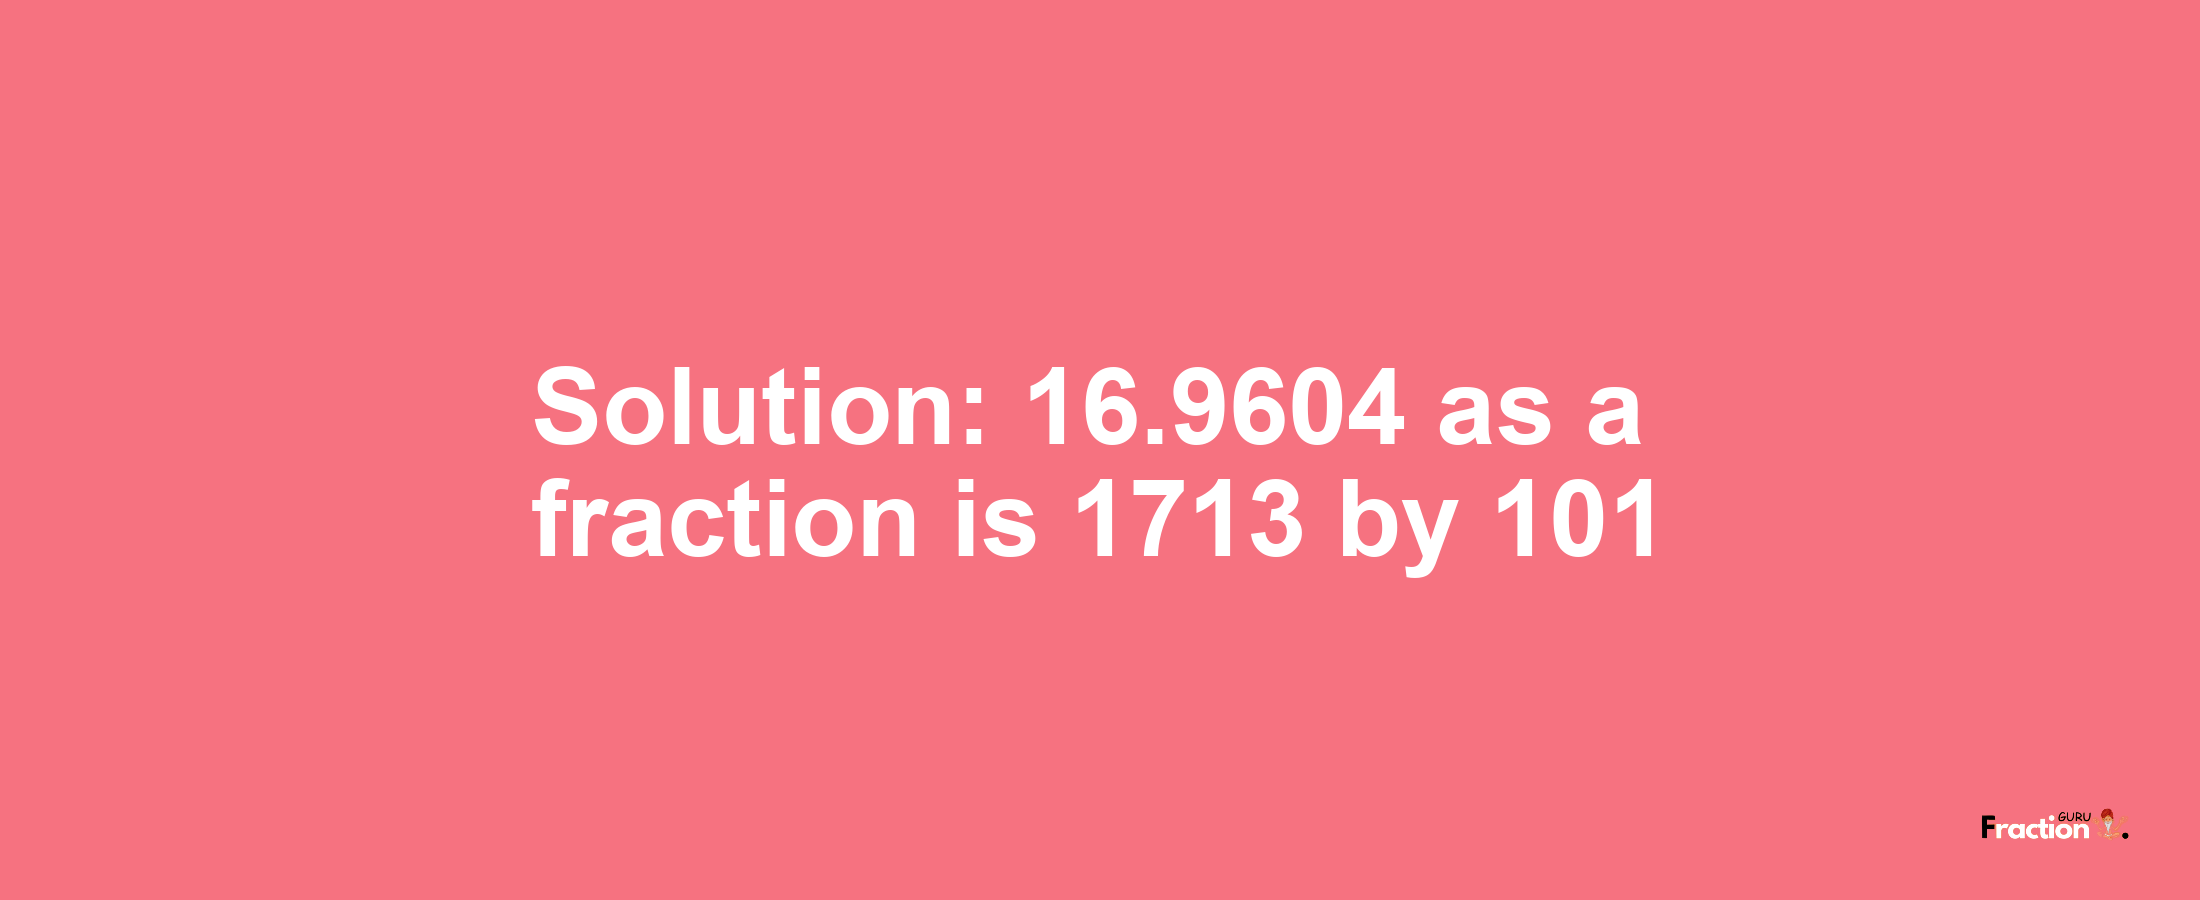 Solution:16.9604 as a fraction is 1713/101